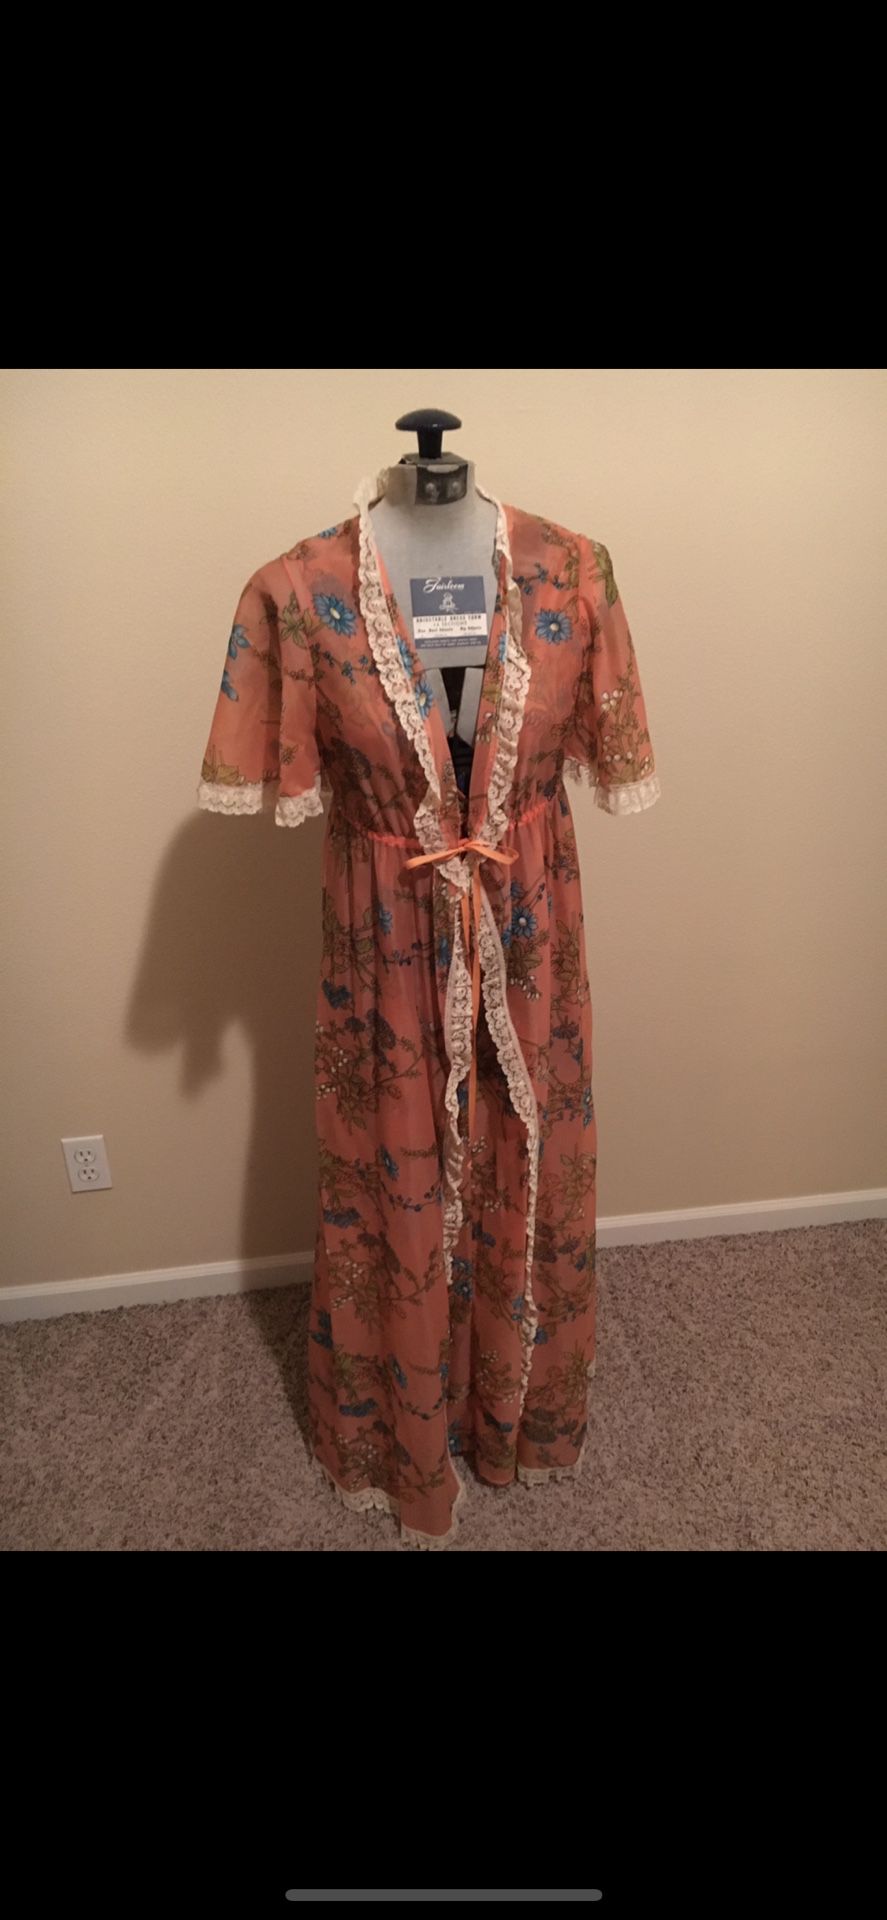 *Vintage ‘70’s era nightgown with coordinating shawl*